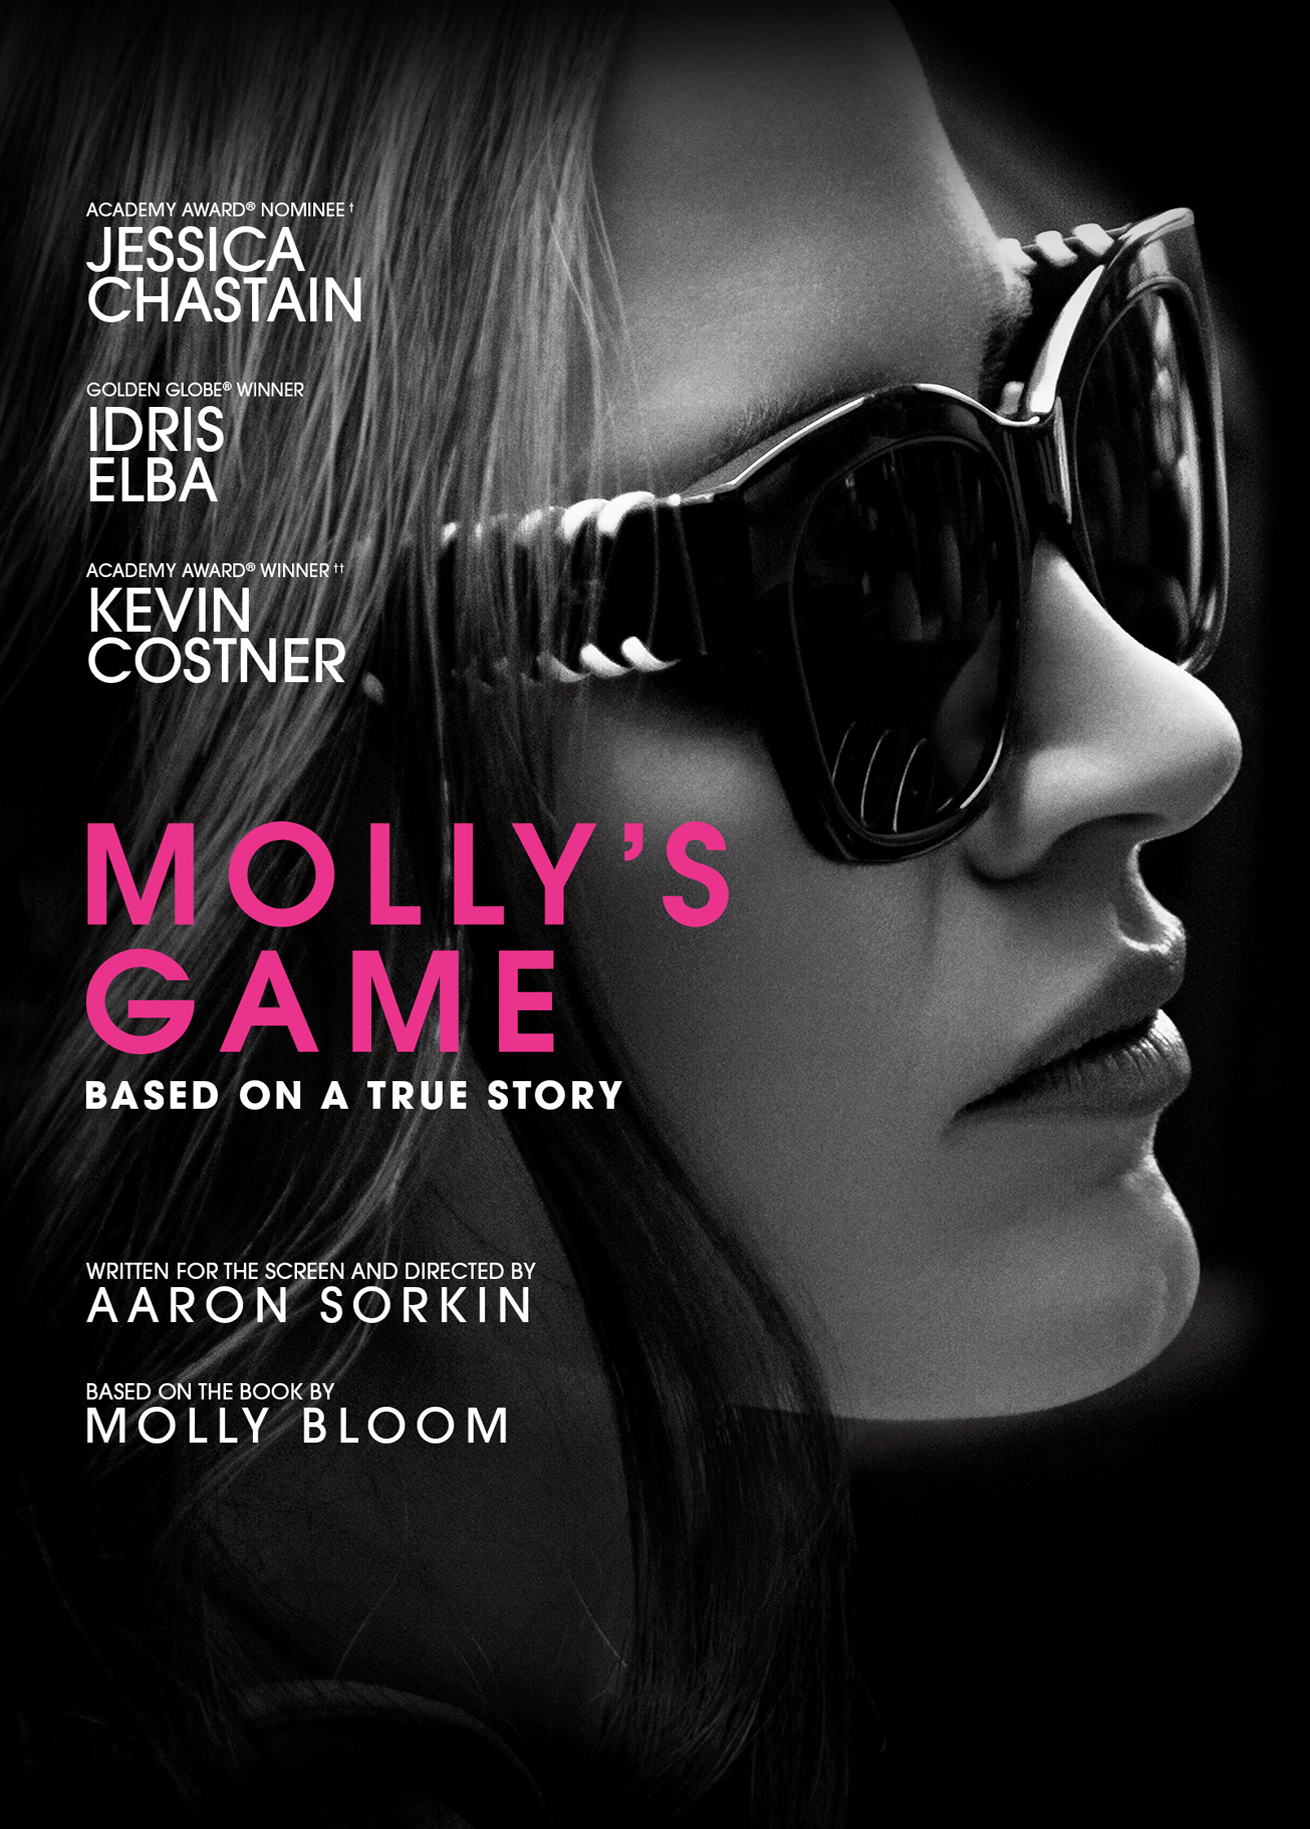 Molly's Game [DVD] [2017] - Best Buy